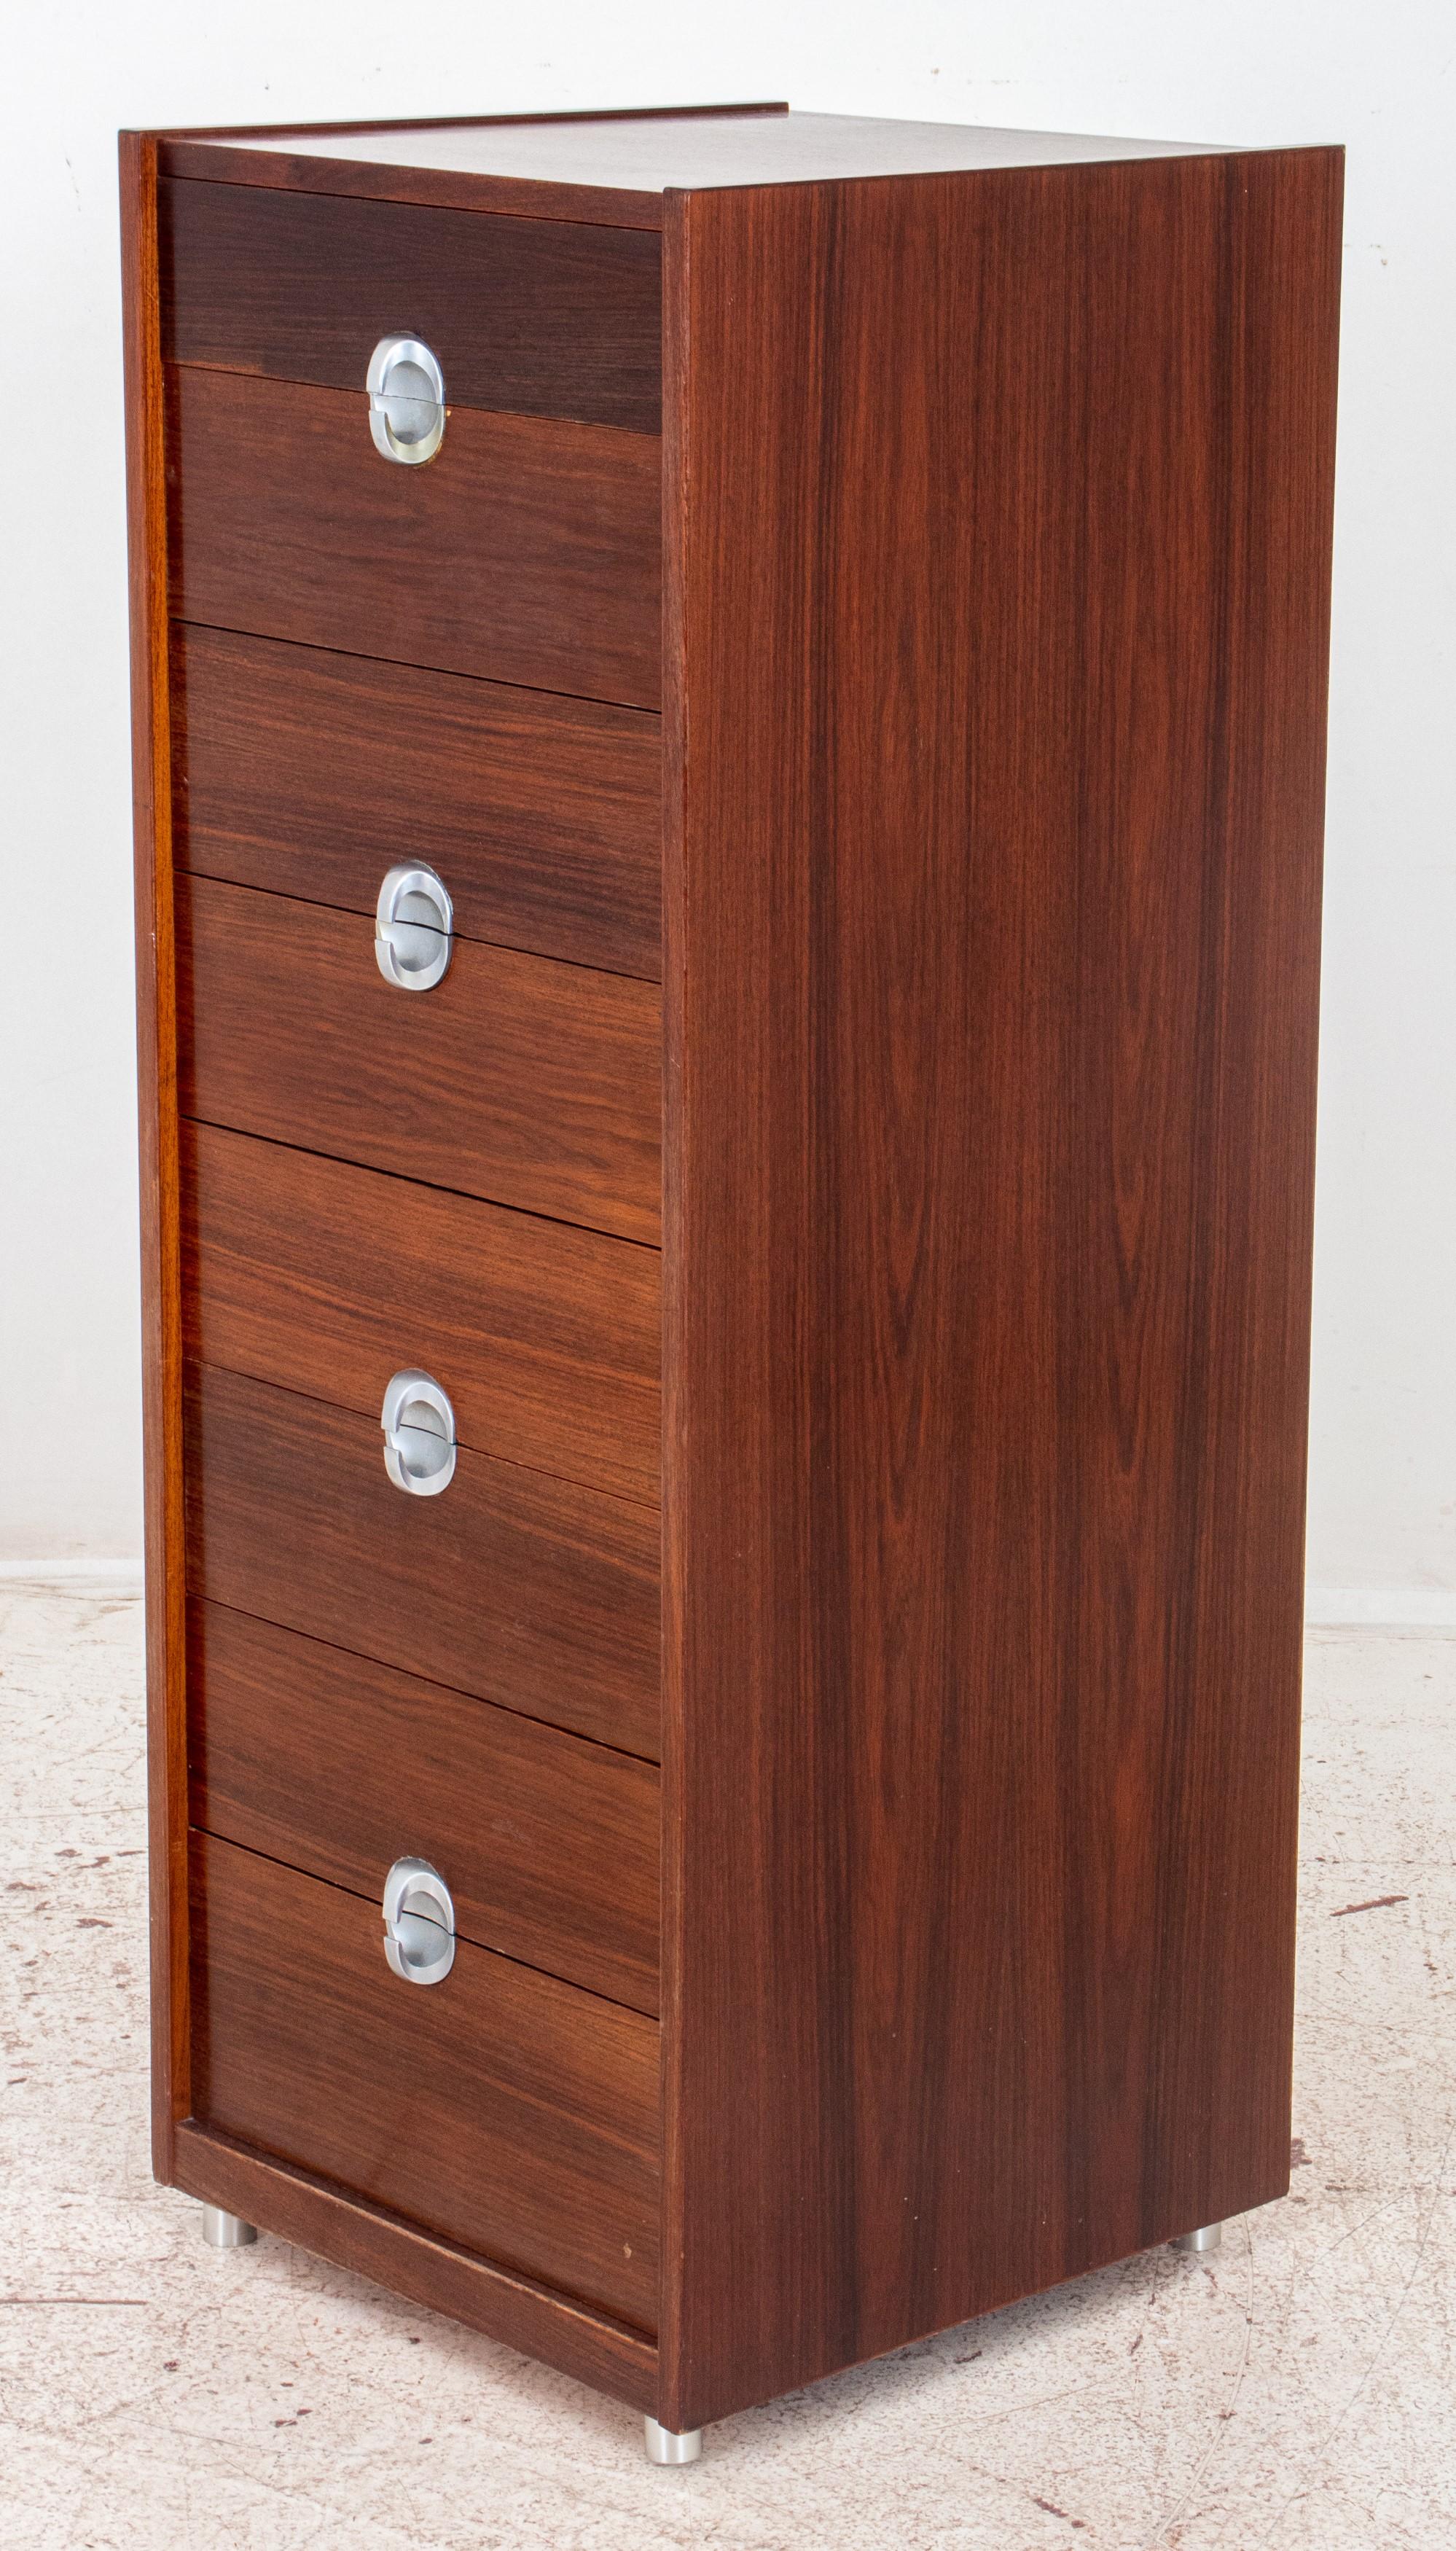 Heltborg Mobler Danish Modern standing chest. Here are the details:

Manufacturer: Heltborg Mobler
Style: Danish Modern
Material: Rosewood-veneered mahogany
Features:
Eight drawers
Brushed steel pulls
Brushed steel columnar legs
Dimensions:
Height